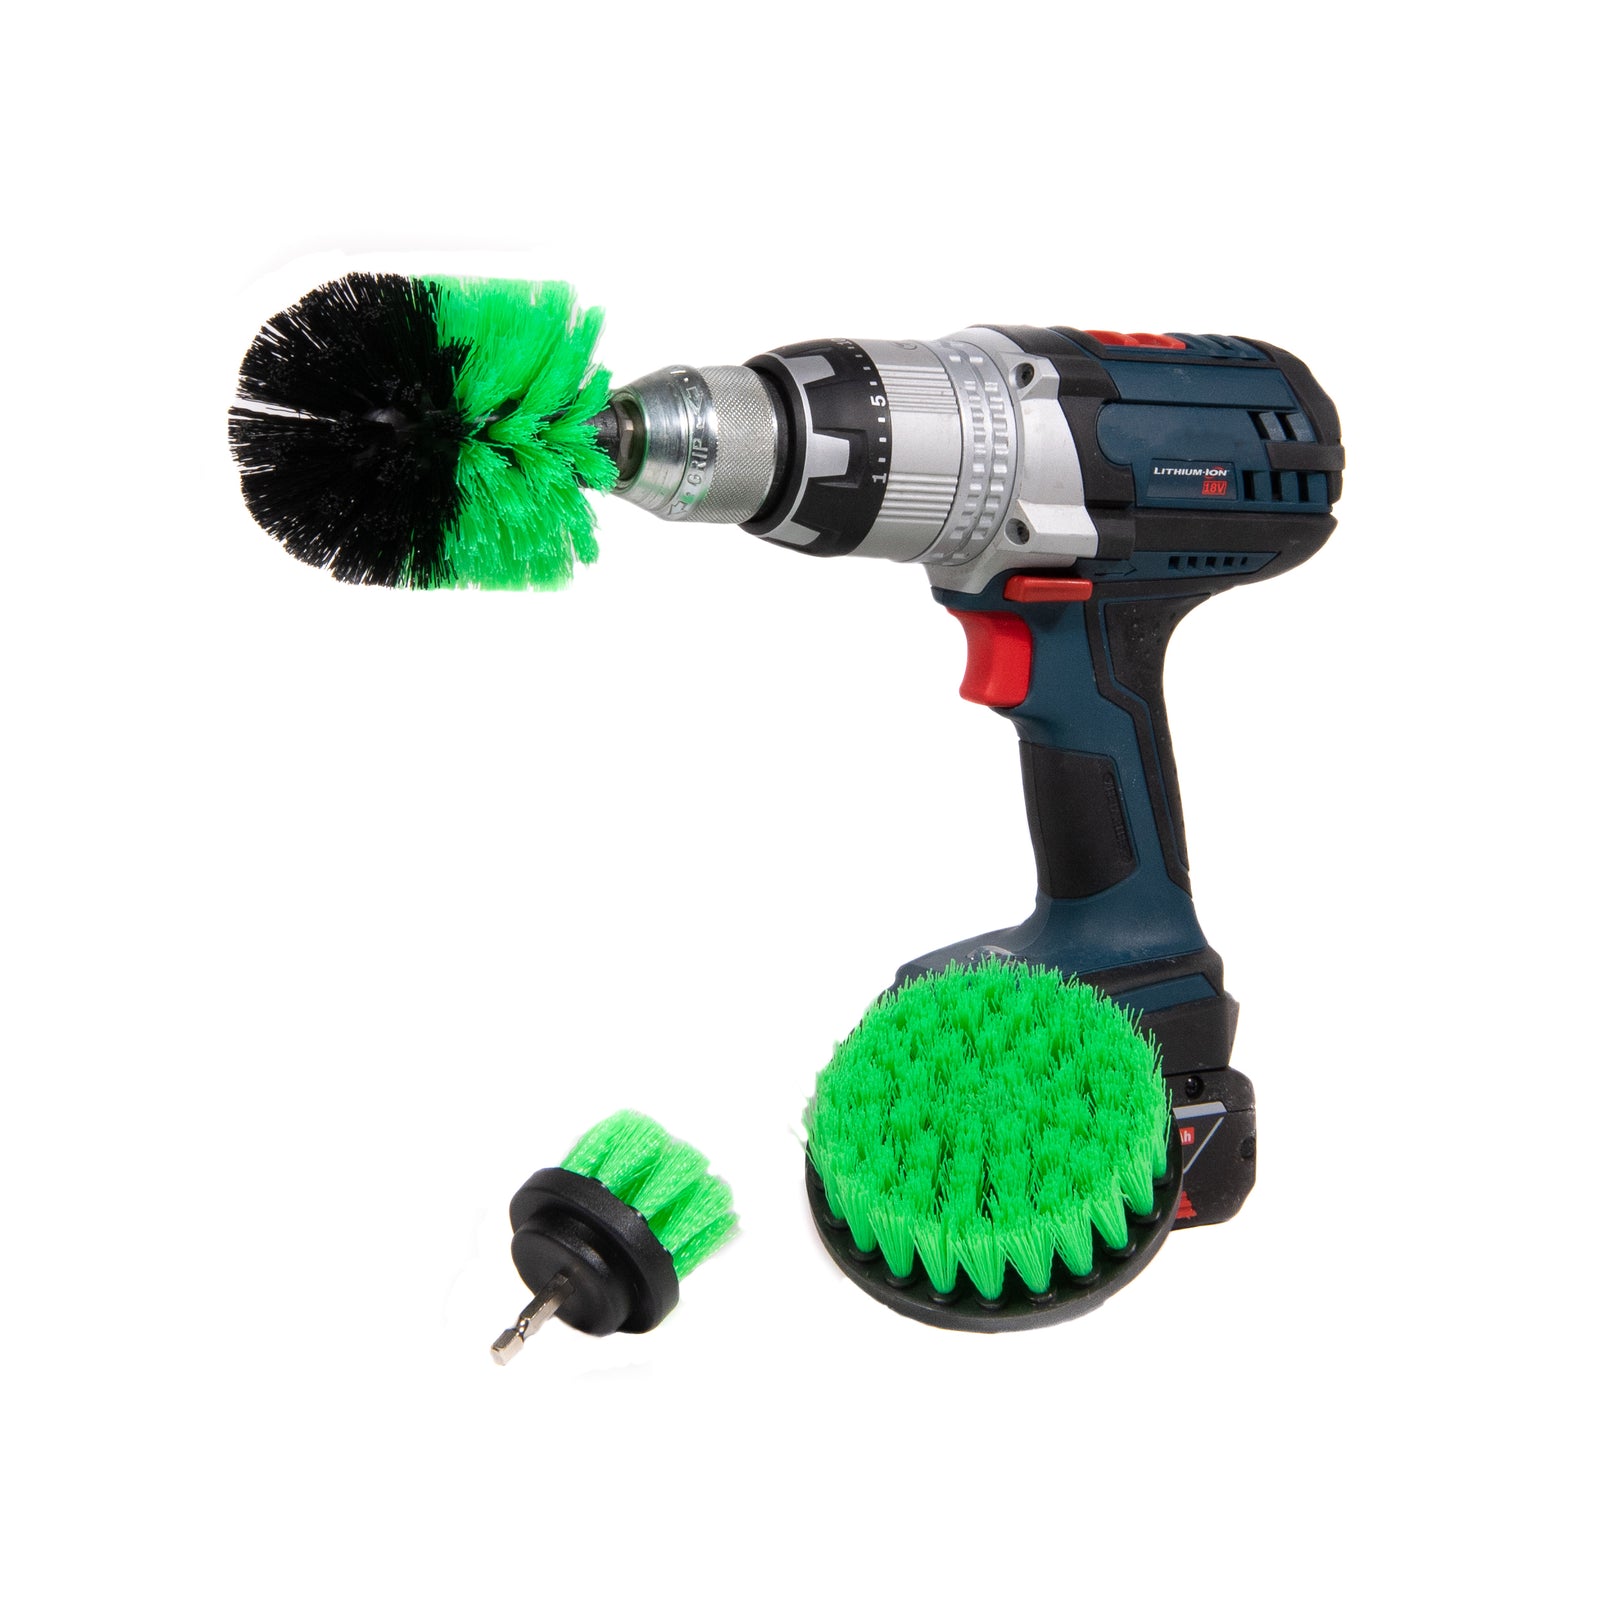 How to Make Your Bathroom Shine With a Drill Brush Attachment